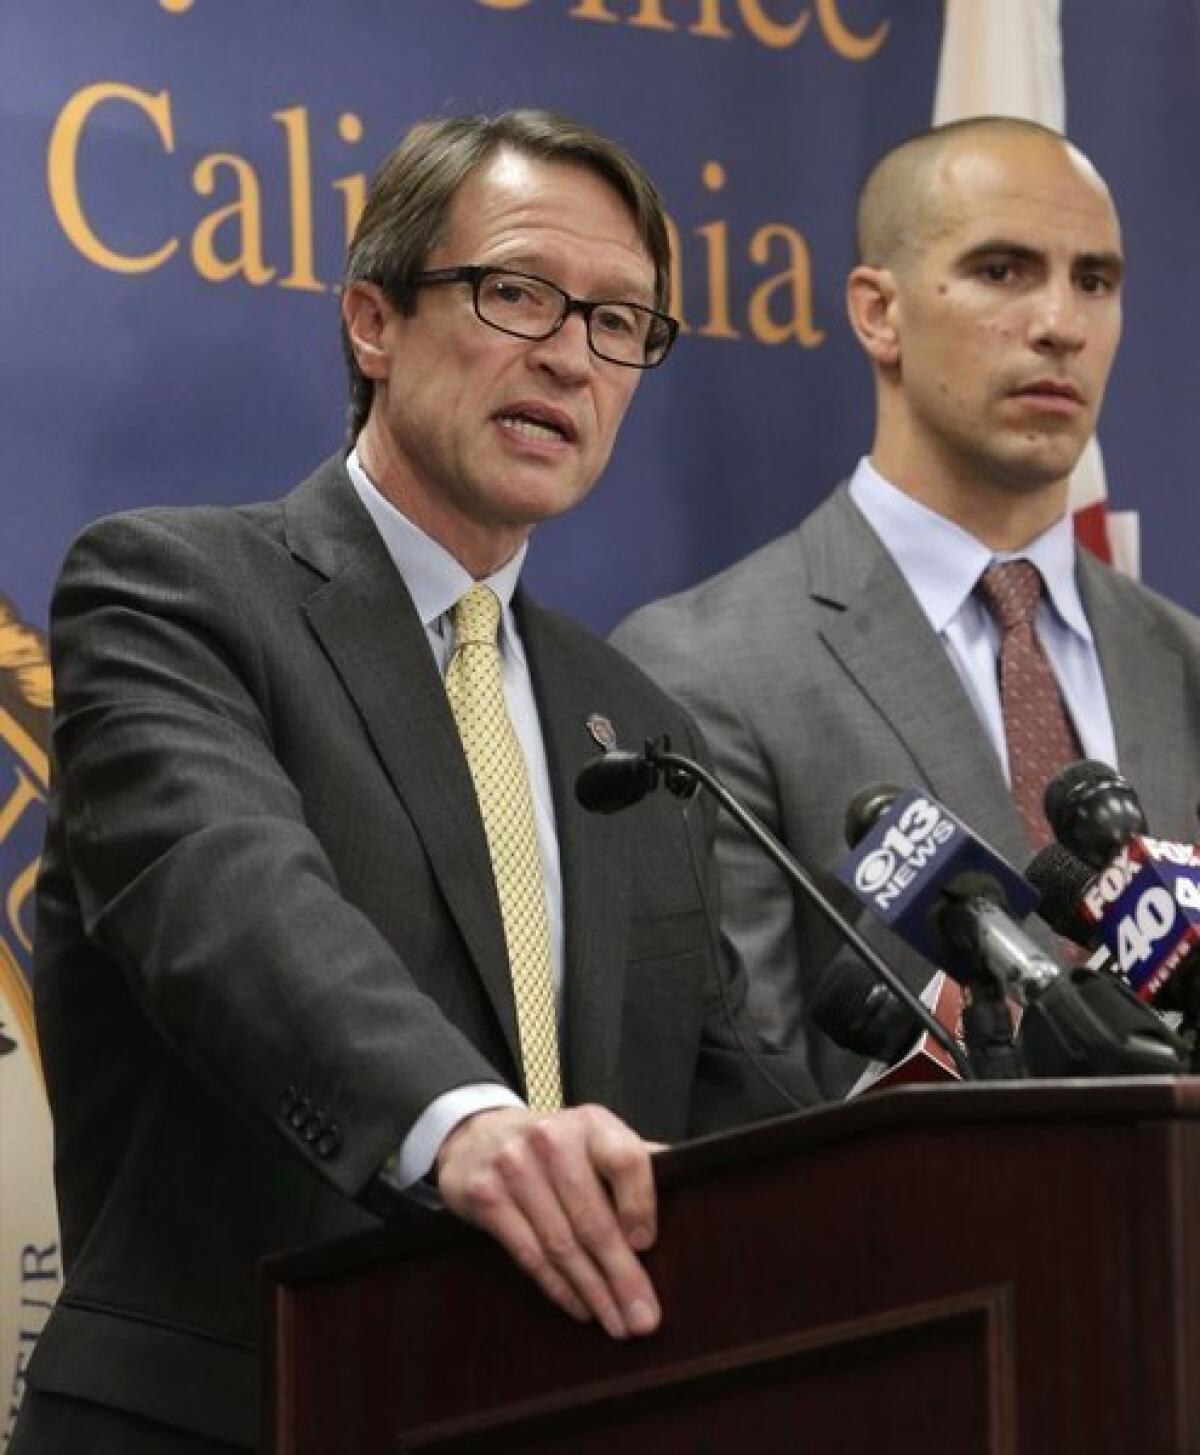 U.S Attorney Benjamin Wagner at recent Sacramento press conference. Wagner's office announced convictions in a foreclosure fraud case.